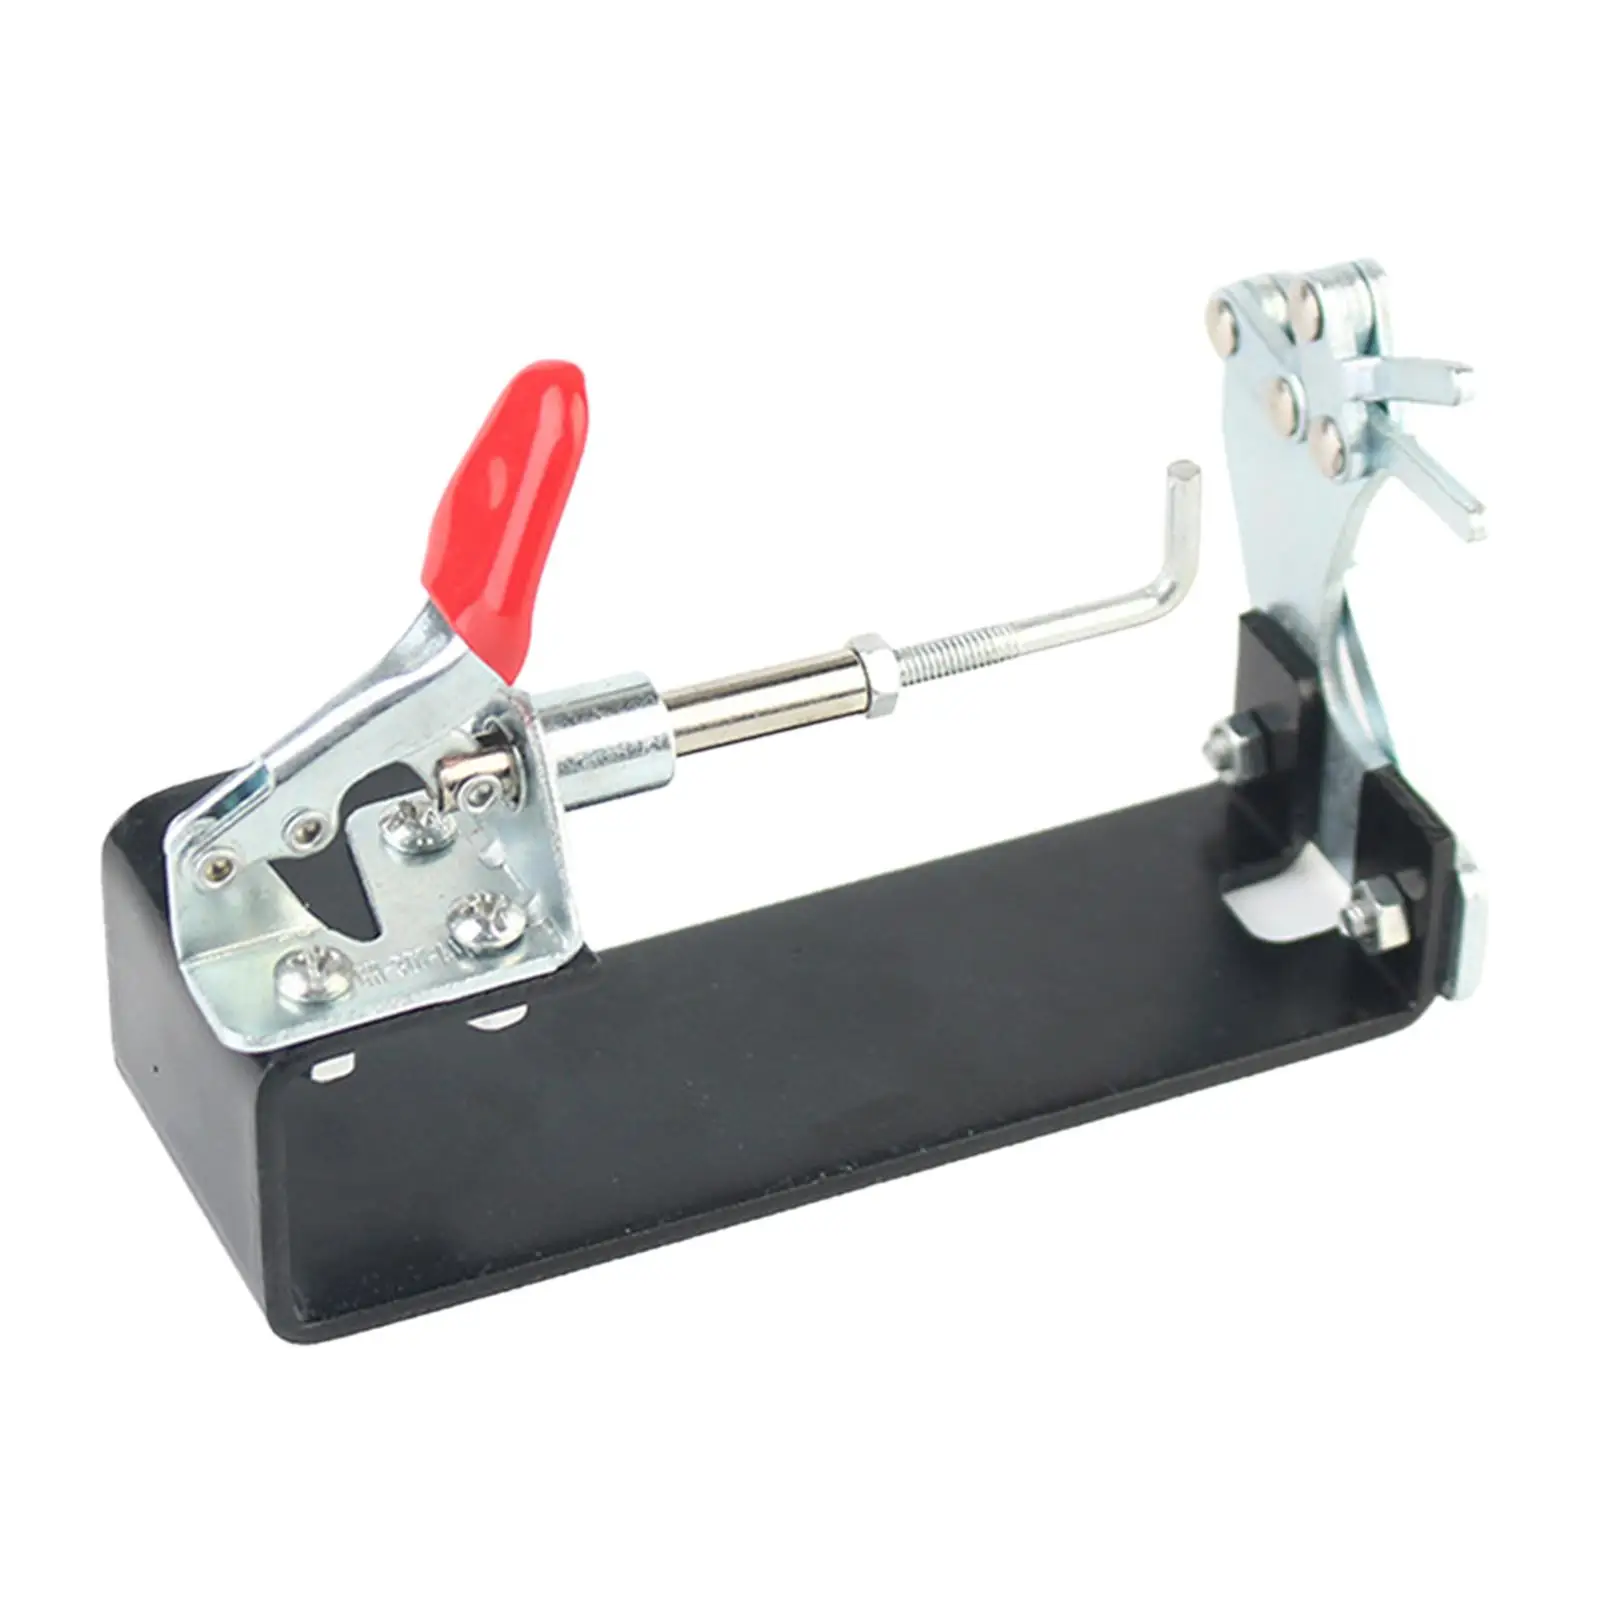 Rubber Band Tied Assistant Lightweight Tying Tool Durable Rubber Band Binding Jig